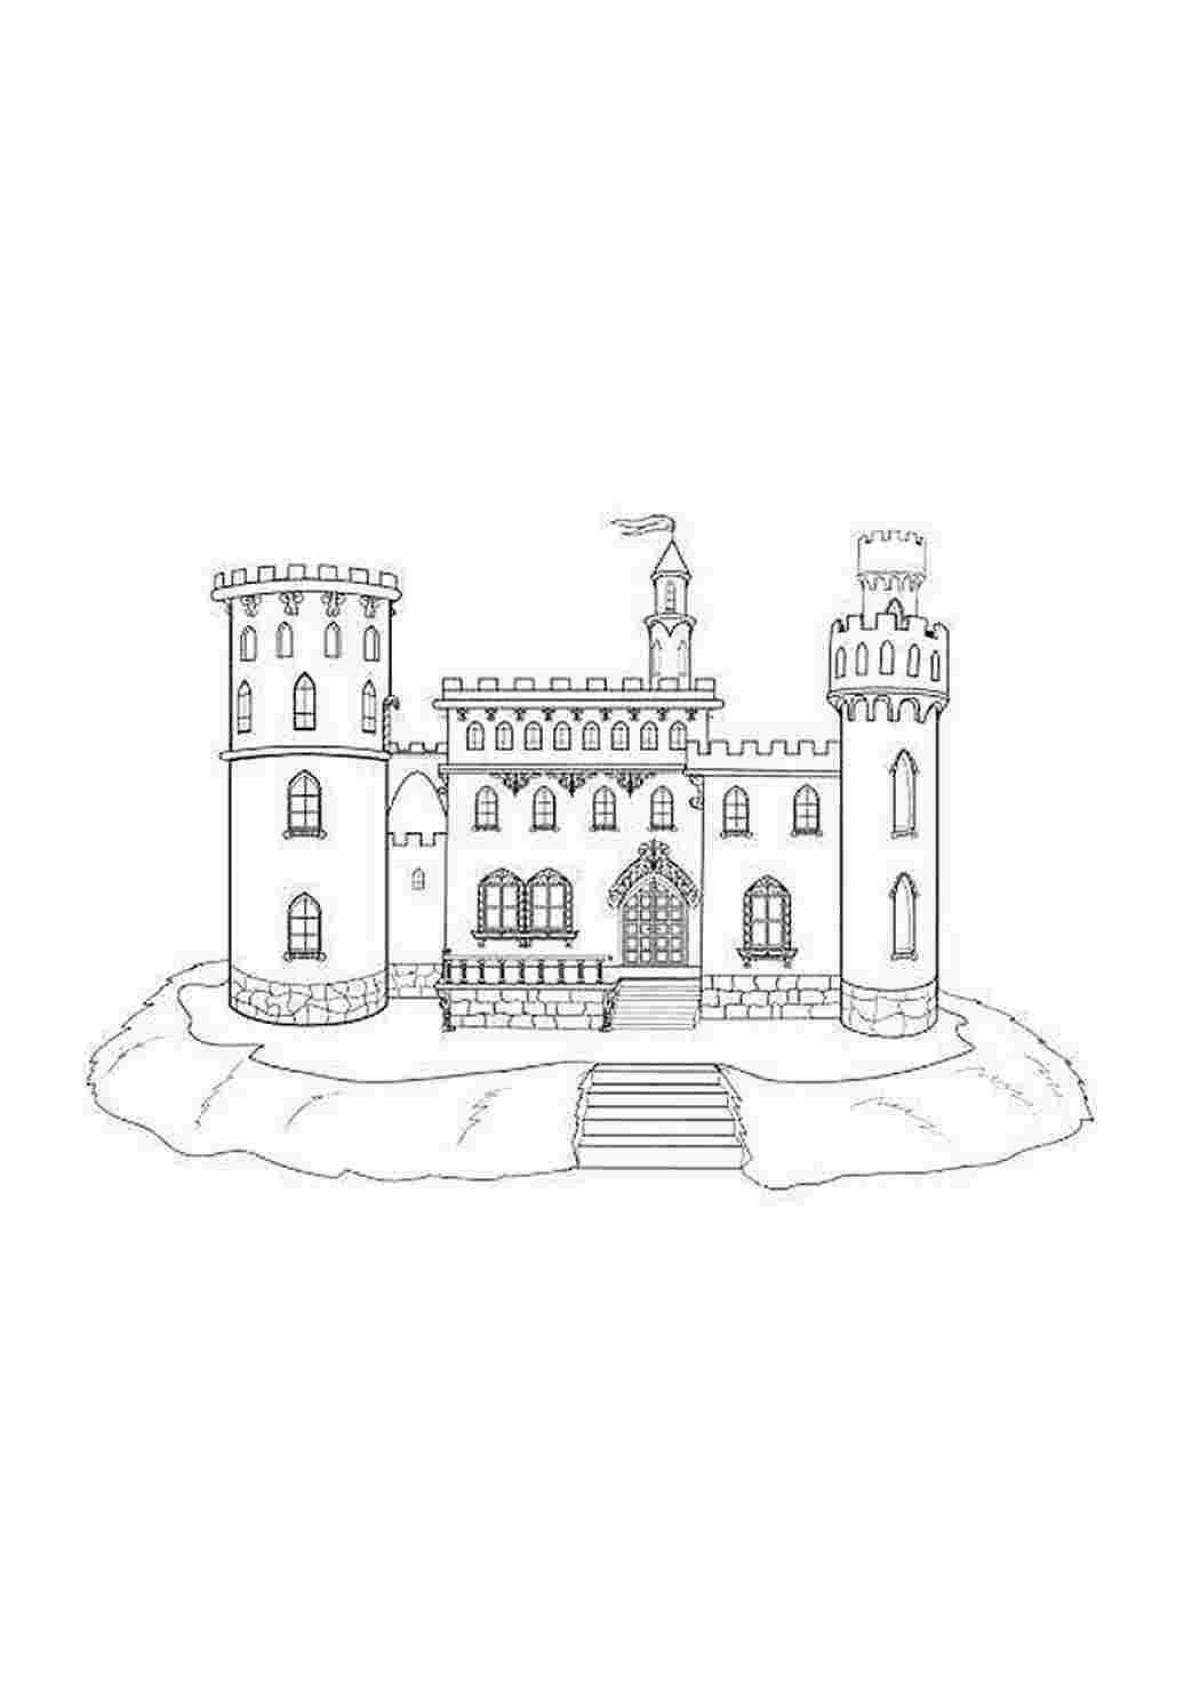 Coloring book dazzling palace for kids